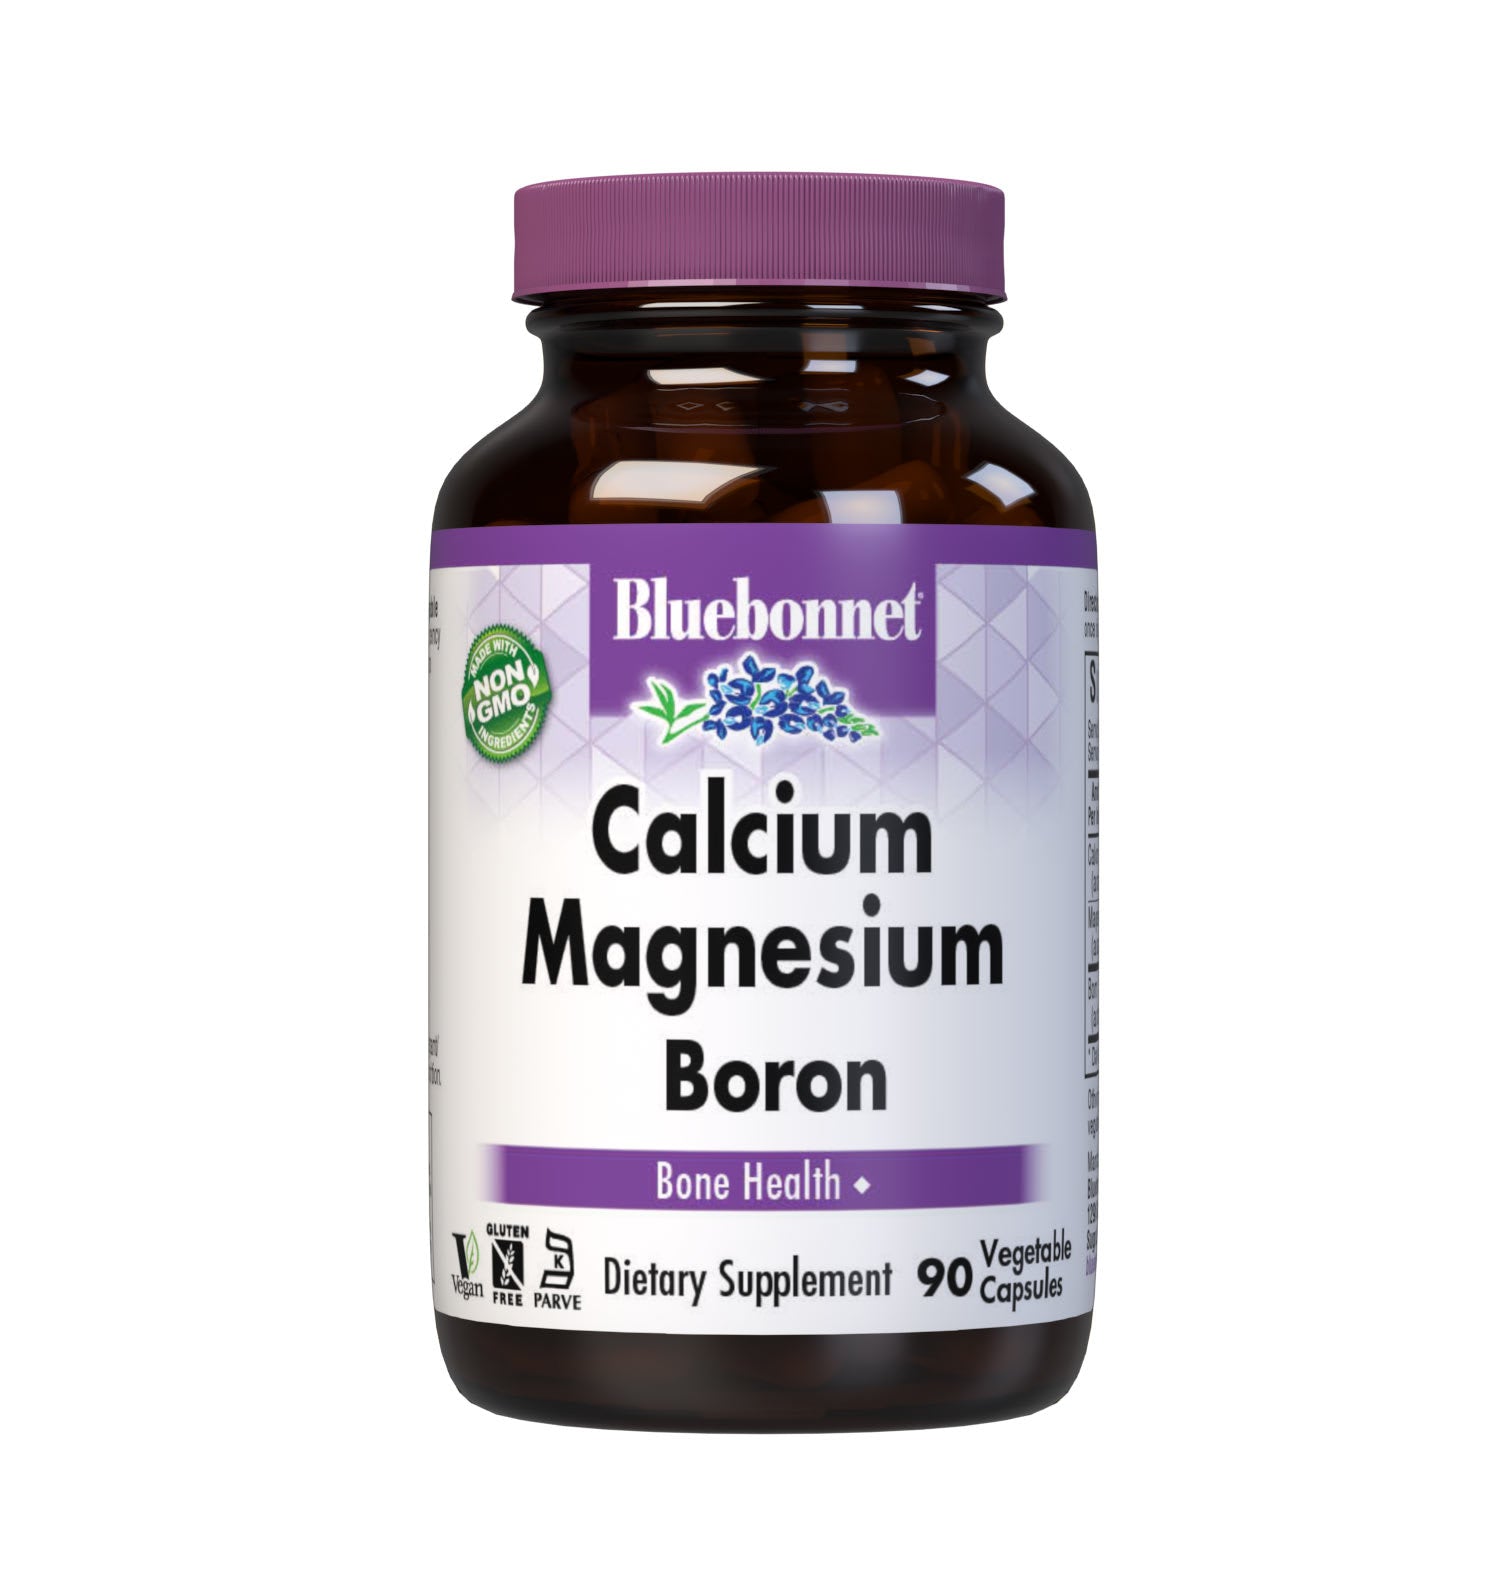 Bluebonnet's Calcium Magnesium Boron 90 Vegetable Capsules are specially formulated with a high potency combination of calcium, magnesium and the trace mineral boron for strong, healthy bones. #size_90 count